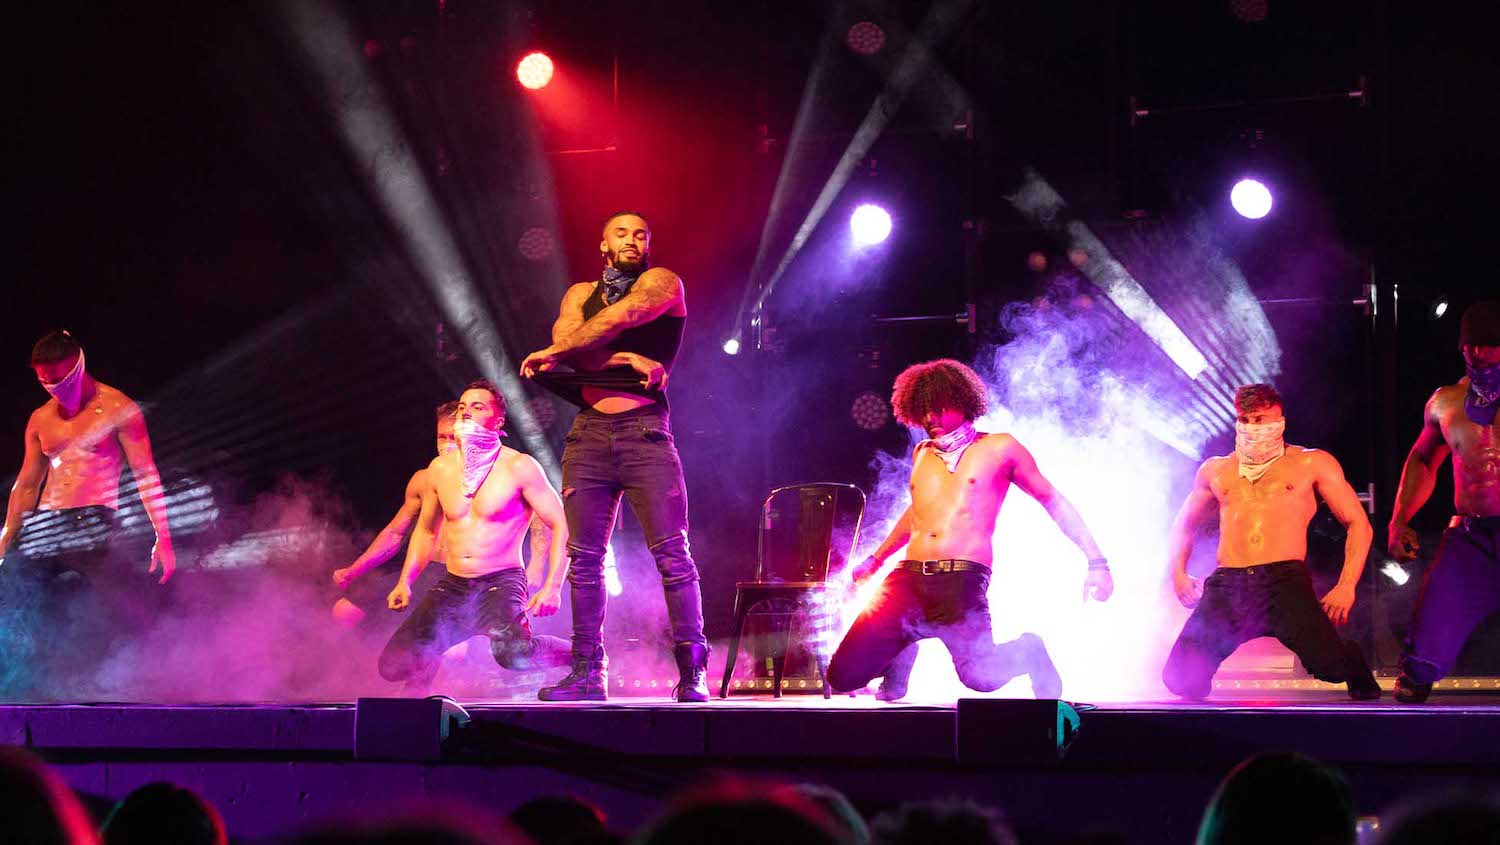 Male Strippers | A Day in the Life of The Dreamboys Tour